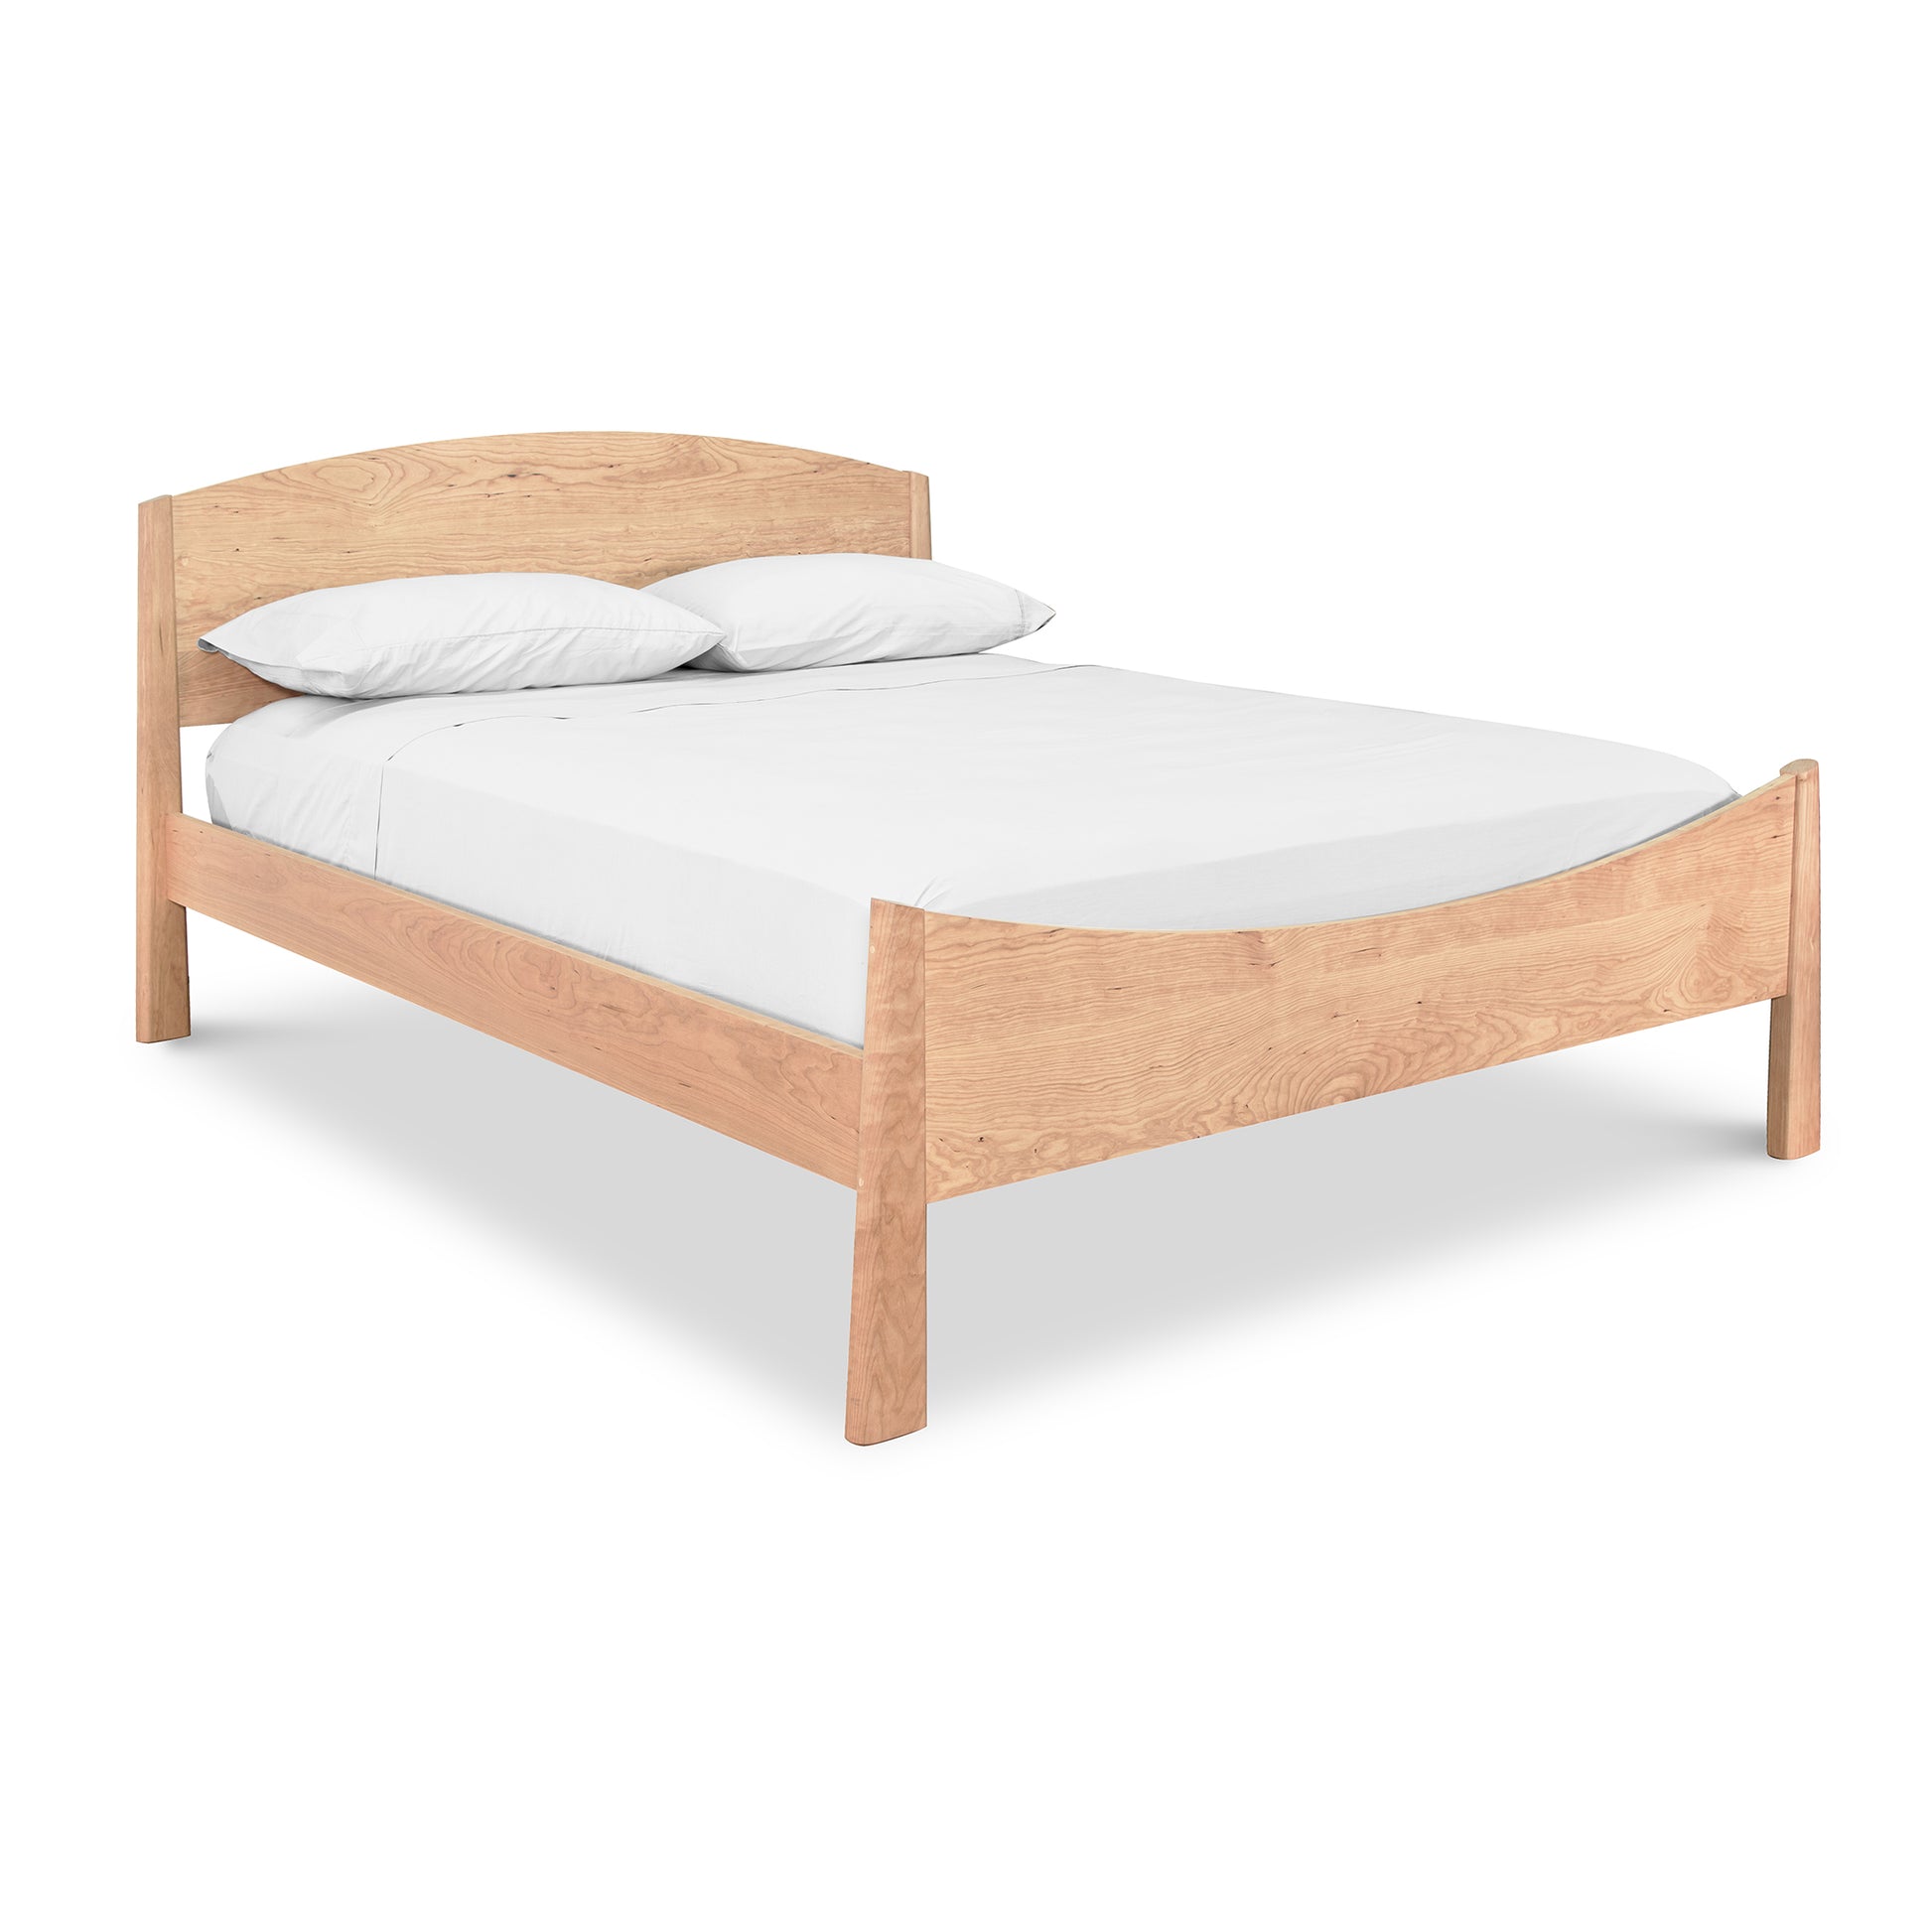 A Cherry Moon Bed by Maple Corner Woodworks, with a simple design featuring a headboard and a footboard, is made up with white bedding and two pillows.